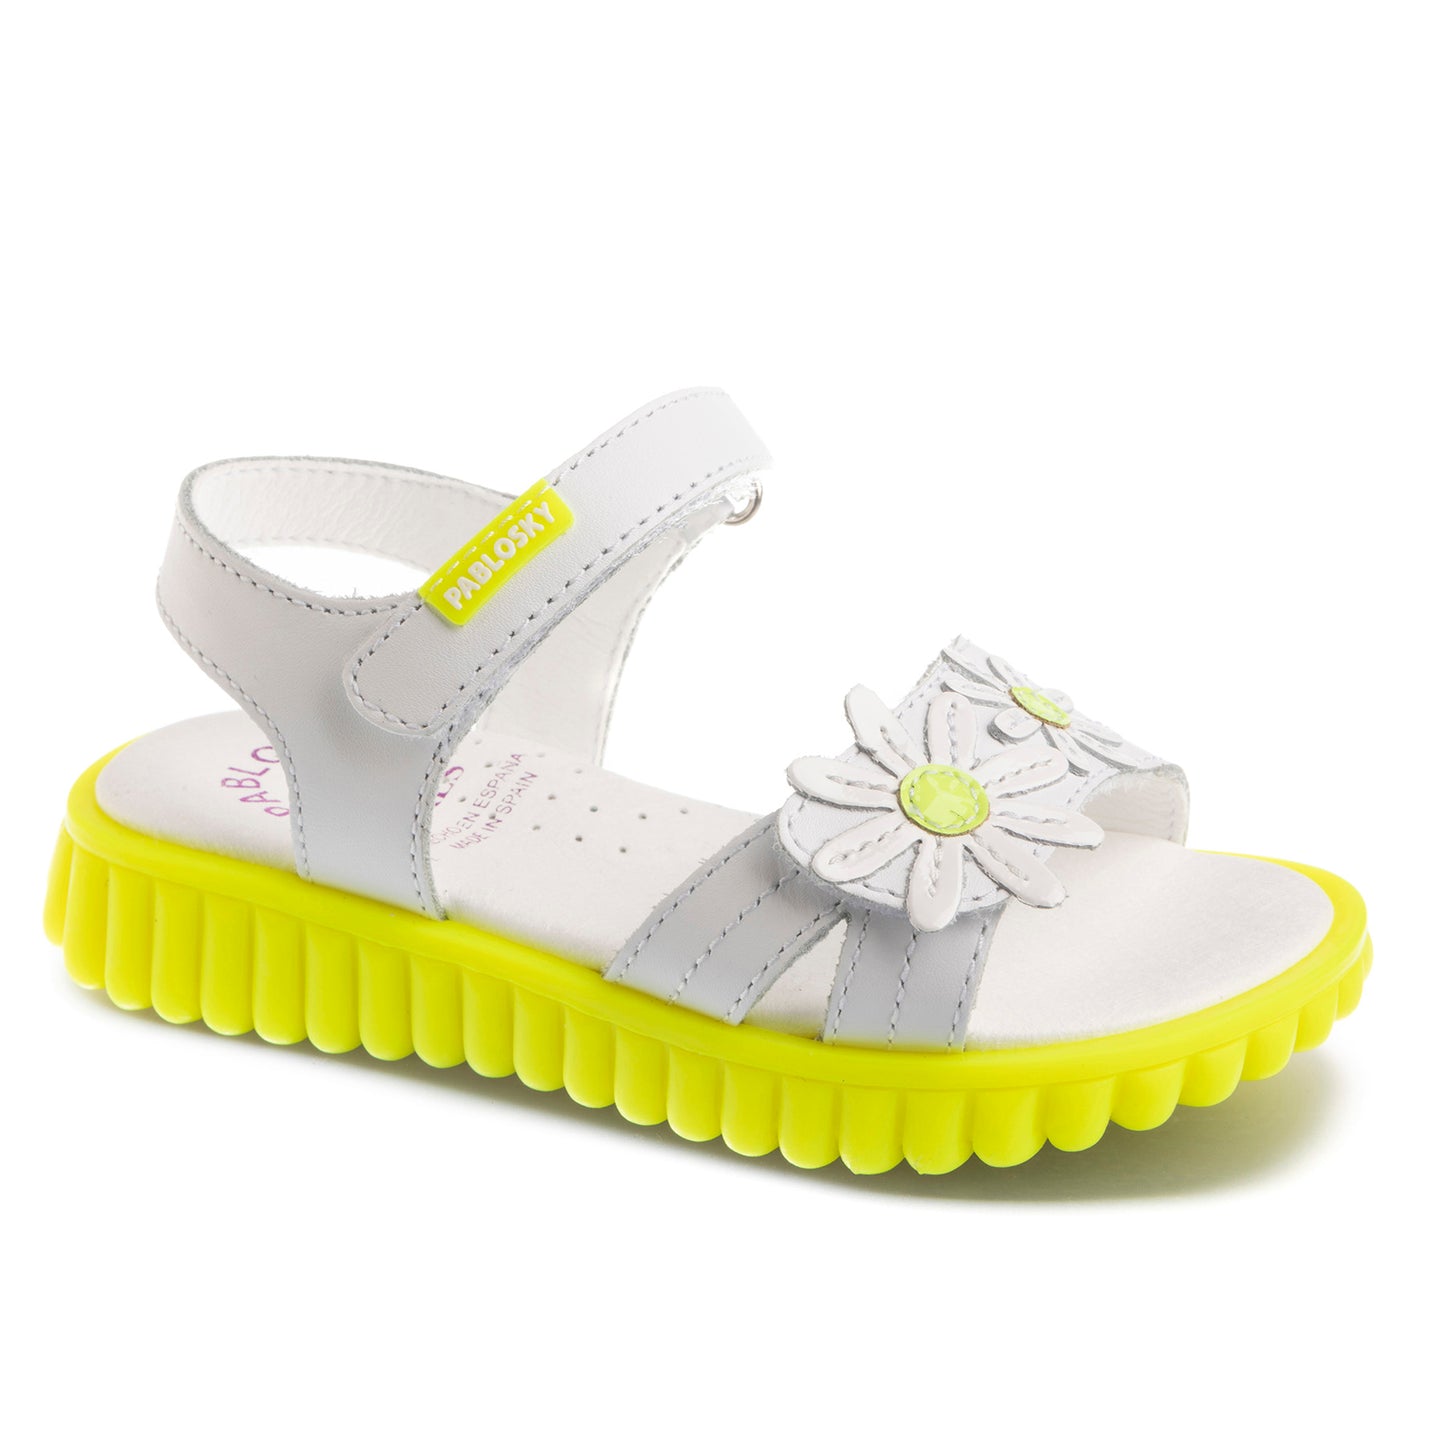 Pablosky Daisies Sandals / 418608